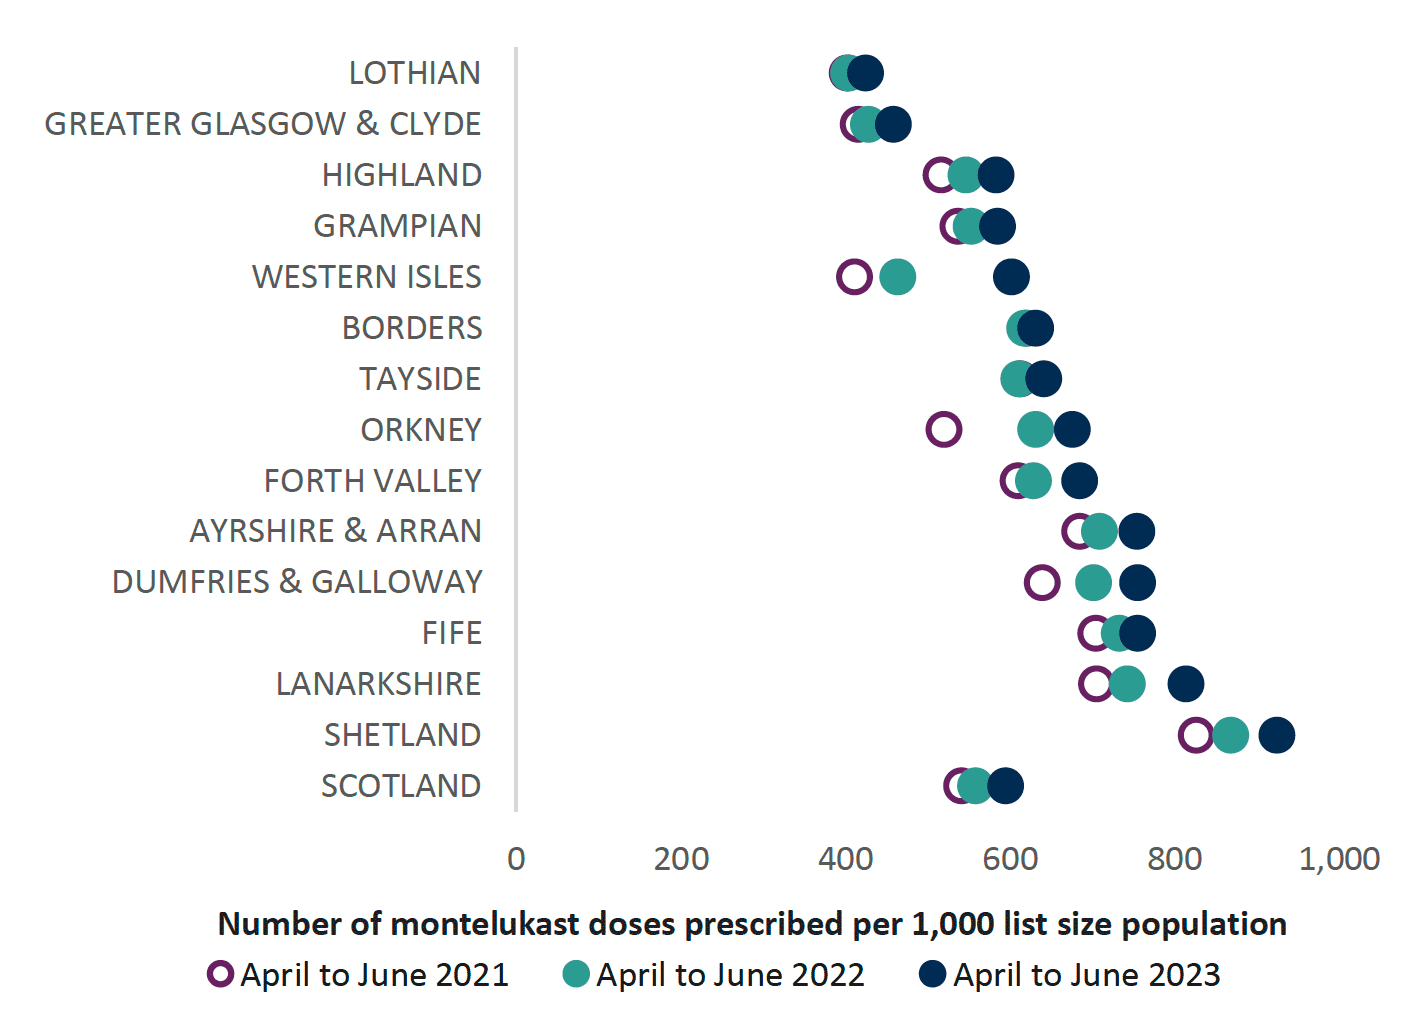 Chart showing number of montelukast doses prescribed compared across health boards and Scotland from 2021 to 2023. Overall Scotland trend is increasing